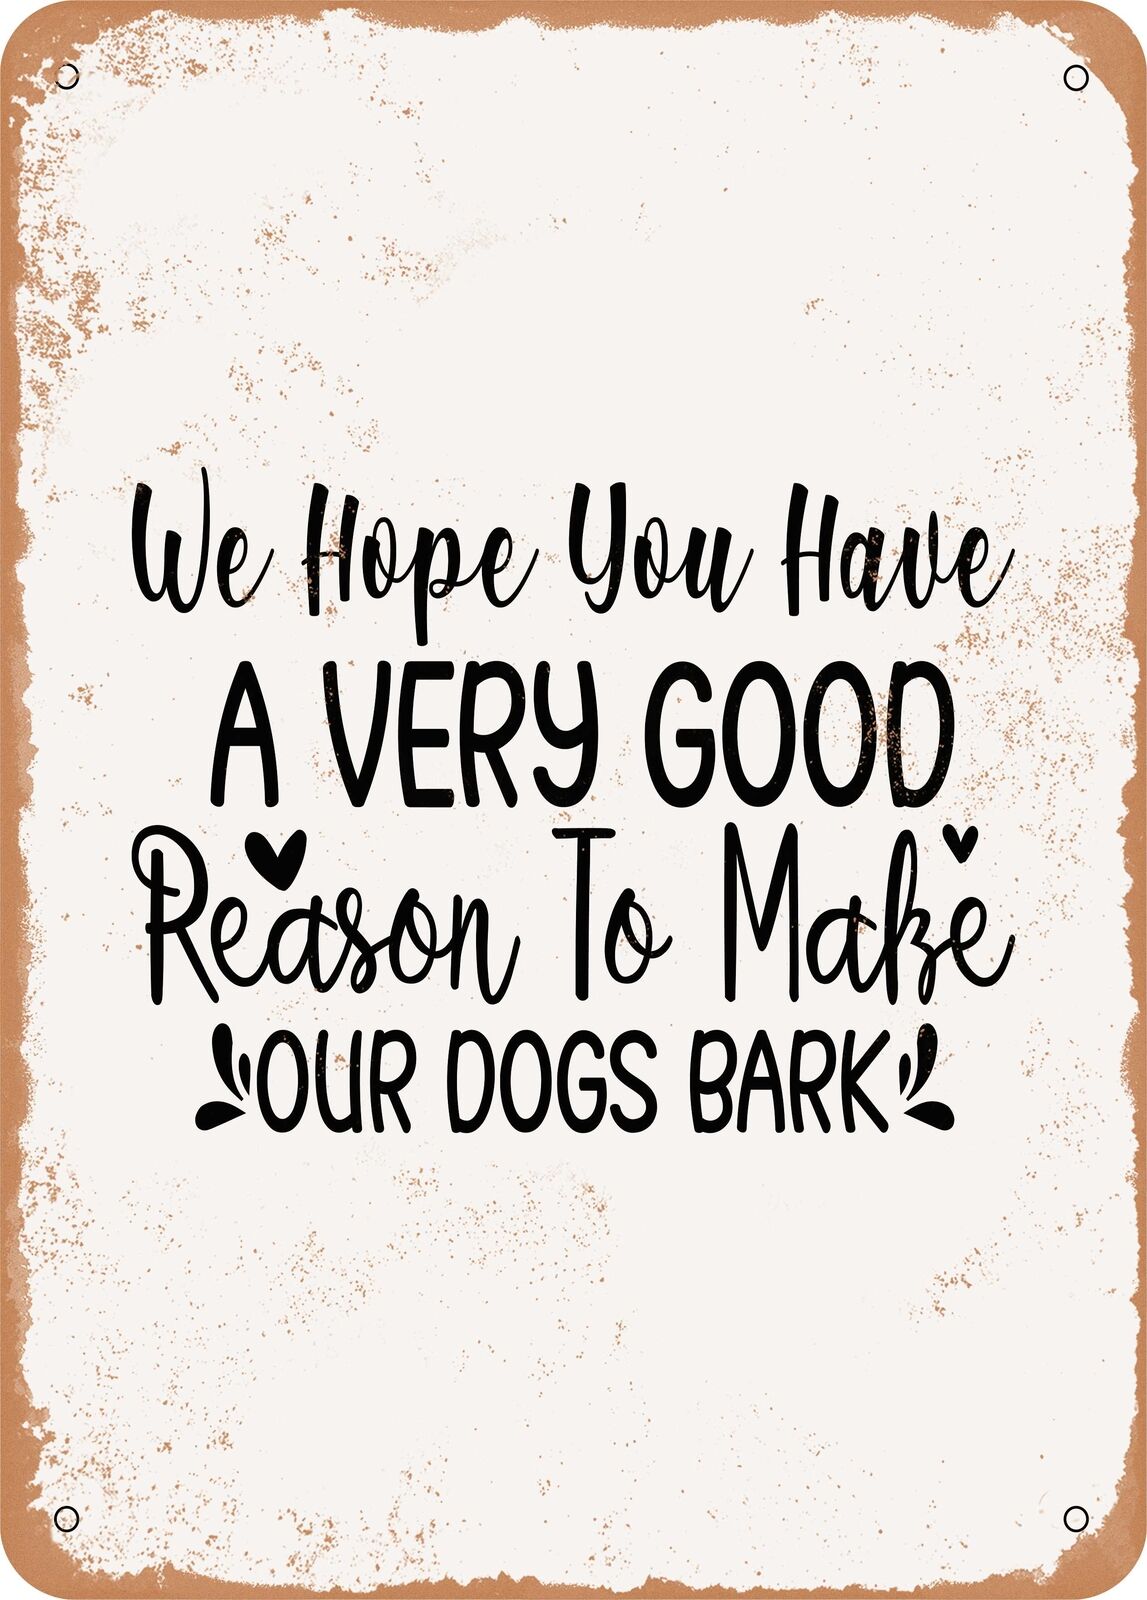 We Hope You Have a Very Good Reason to Make Our Dogs Bark - Vintage Look